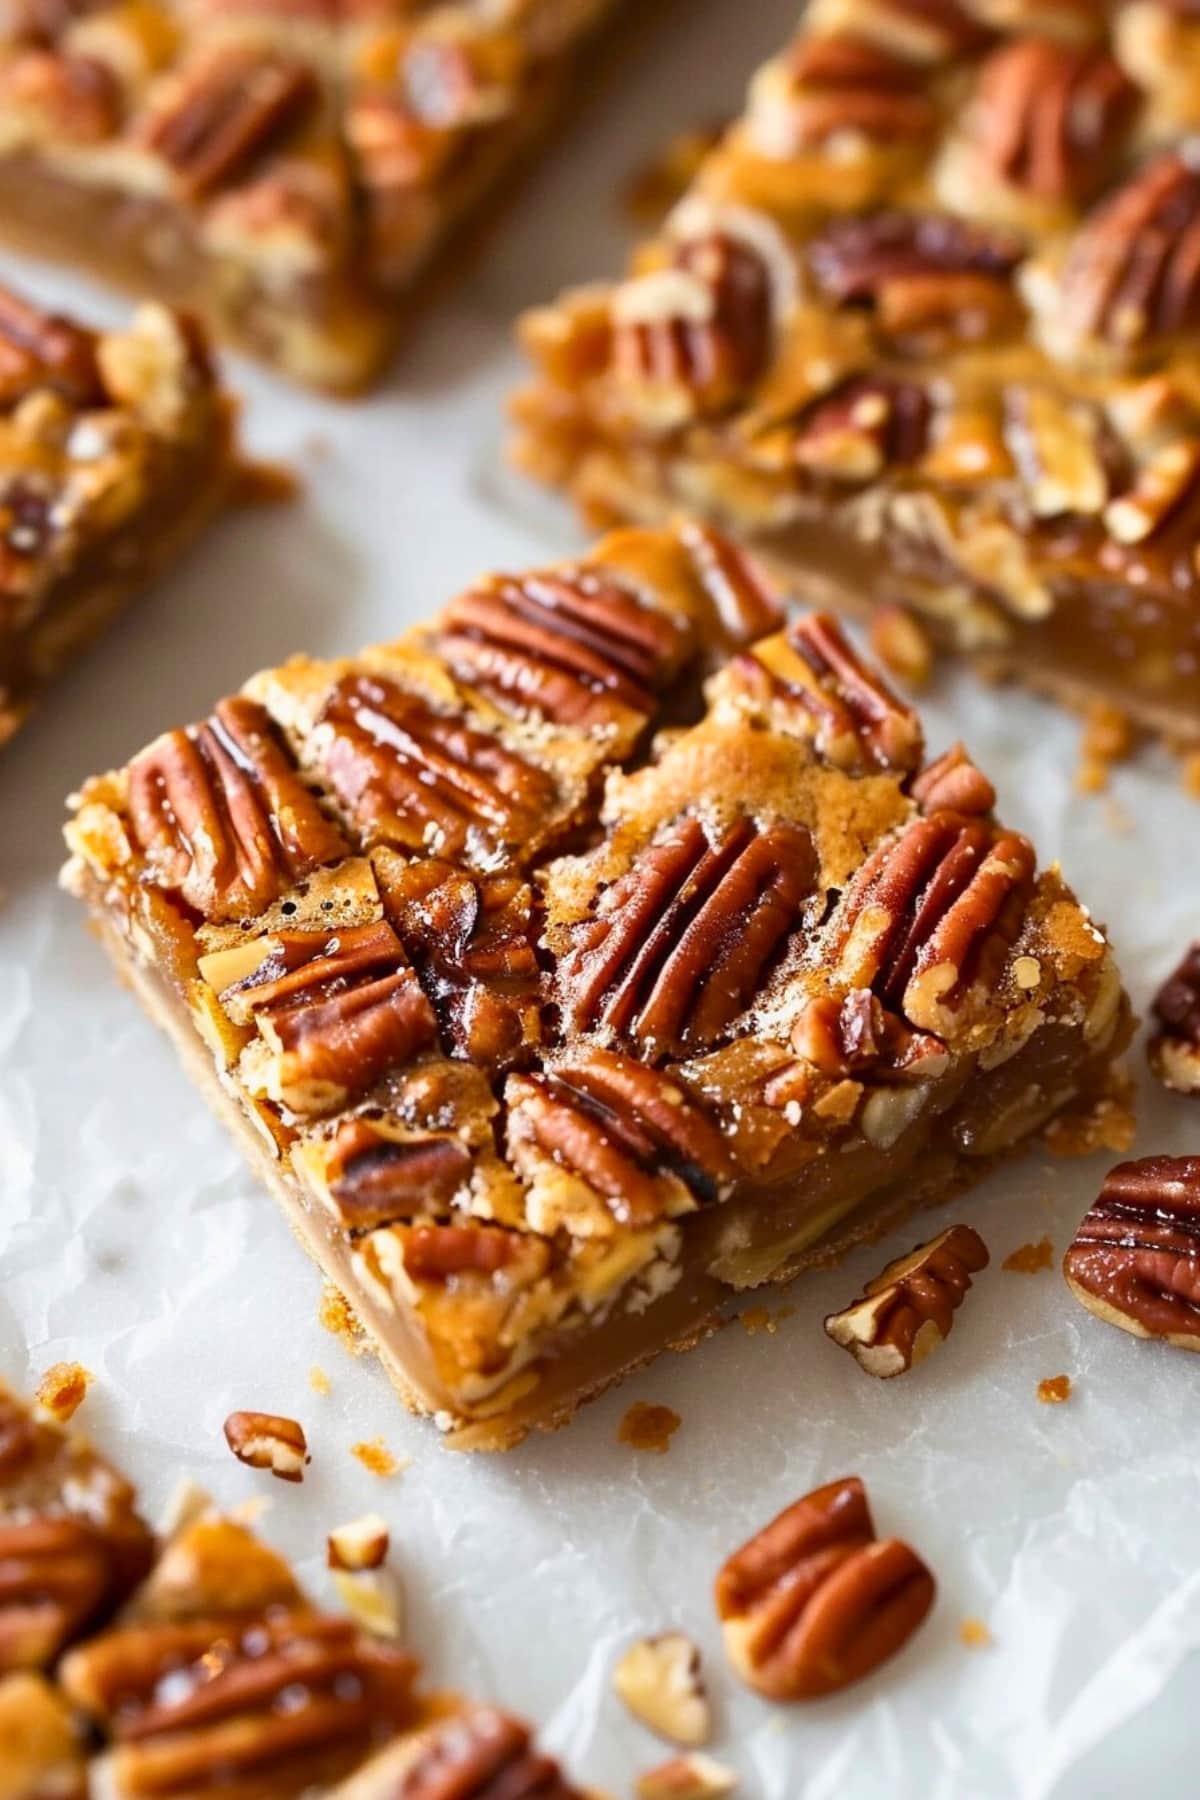 Pecan pie sliced into bars on a parchment paper.